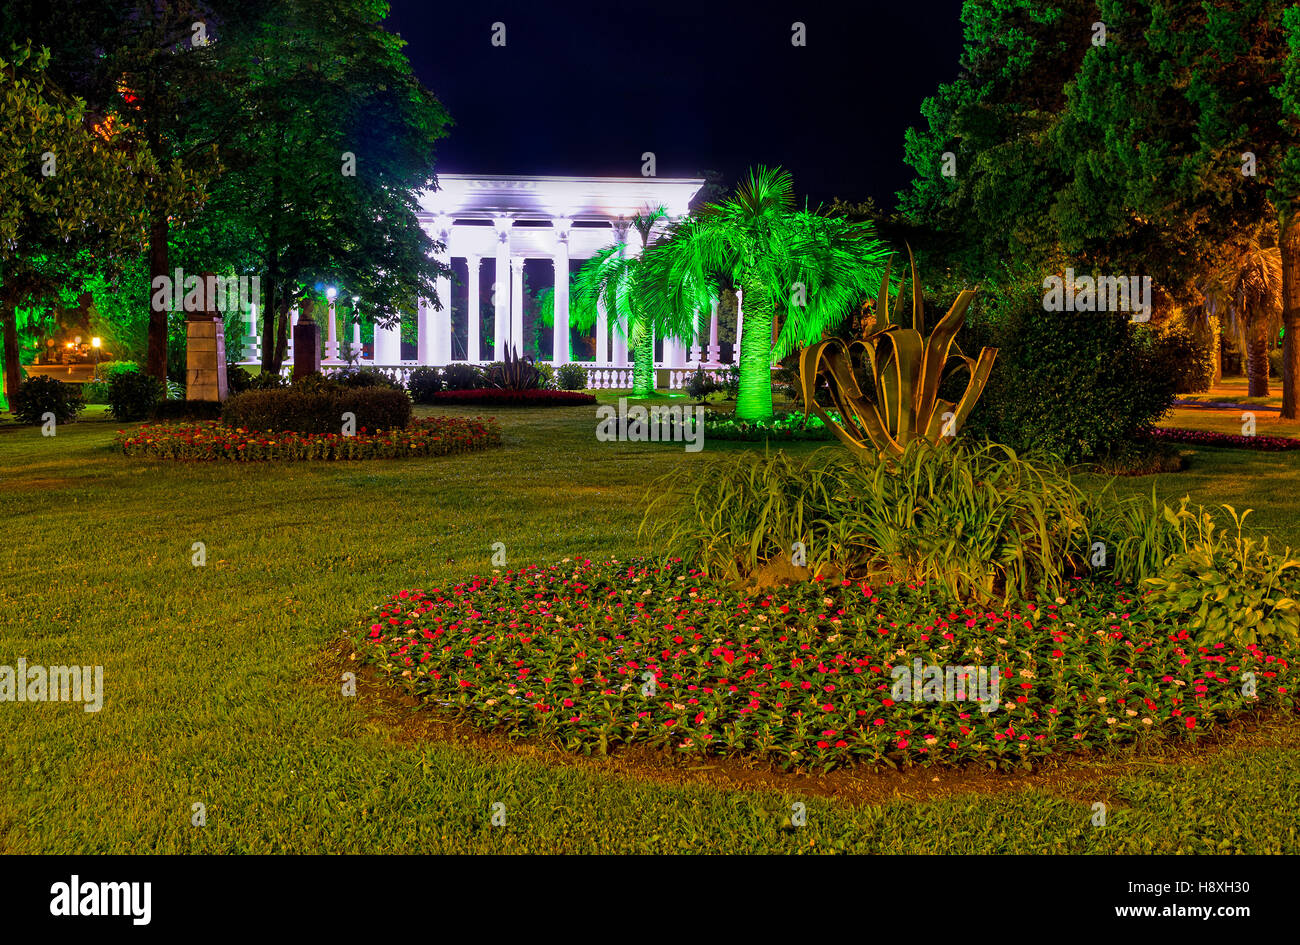 The colorful flower beds, illuminated palms and dark trees in the evening Seaside Park of Batumi, Georgia. Stock Photo